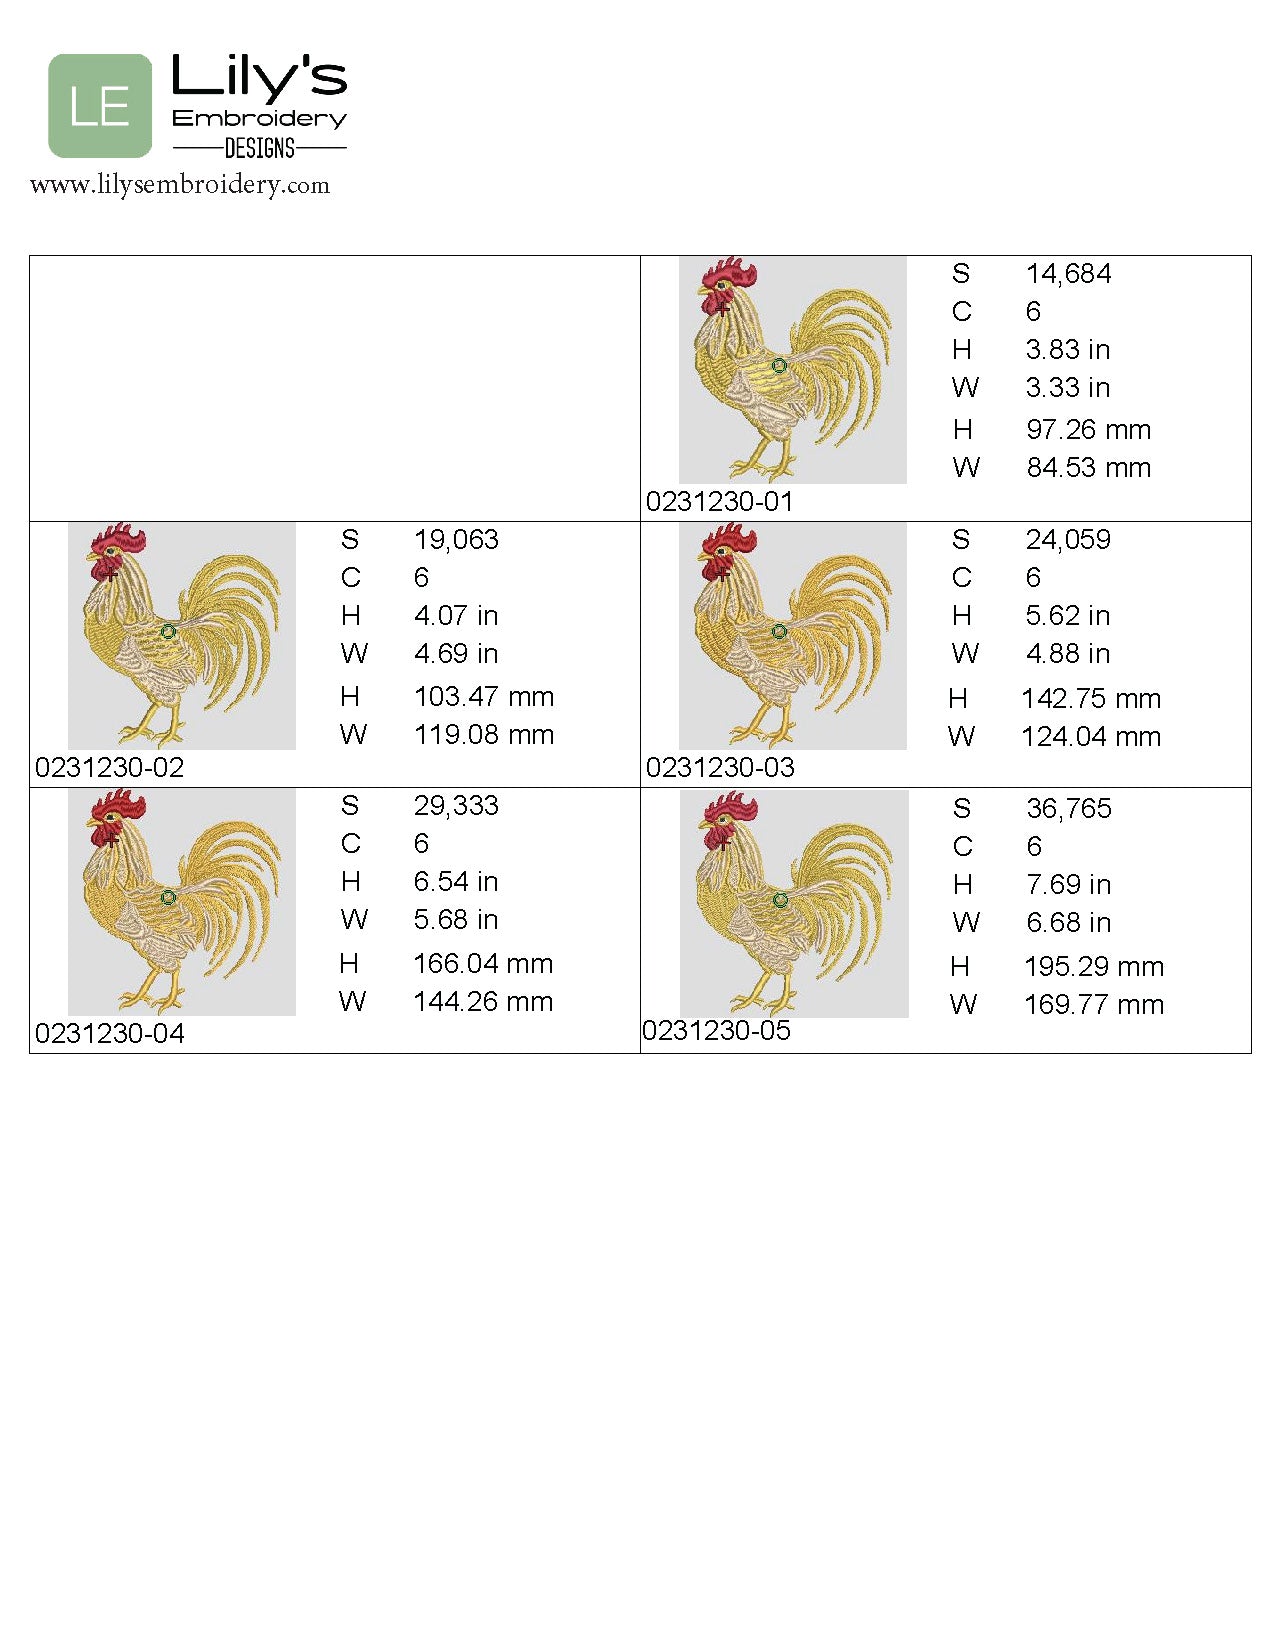 Gold Rooster Machine Embroidery Design - 5 Sizes